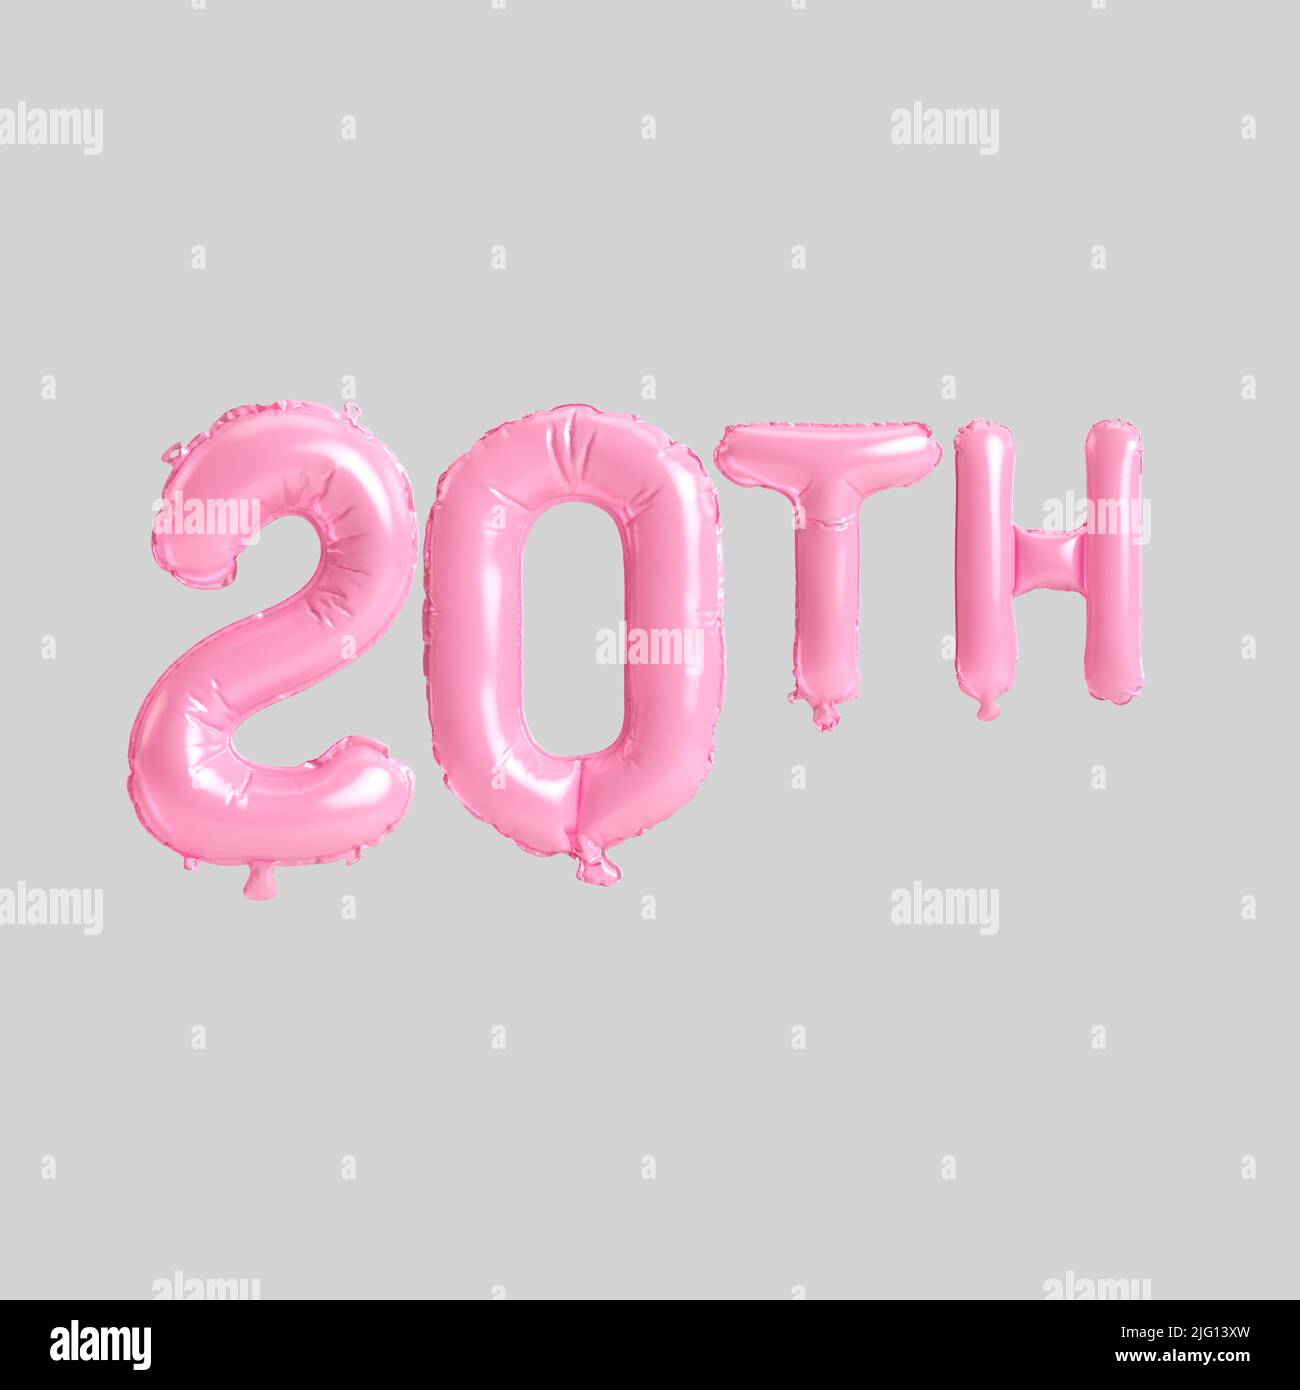 3d illustration of 20th pink balloons isolated on background Stock Photo